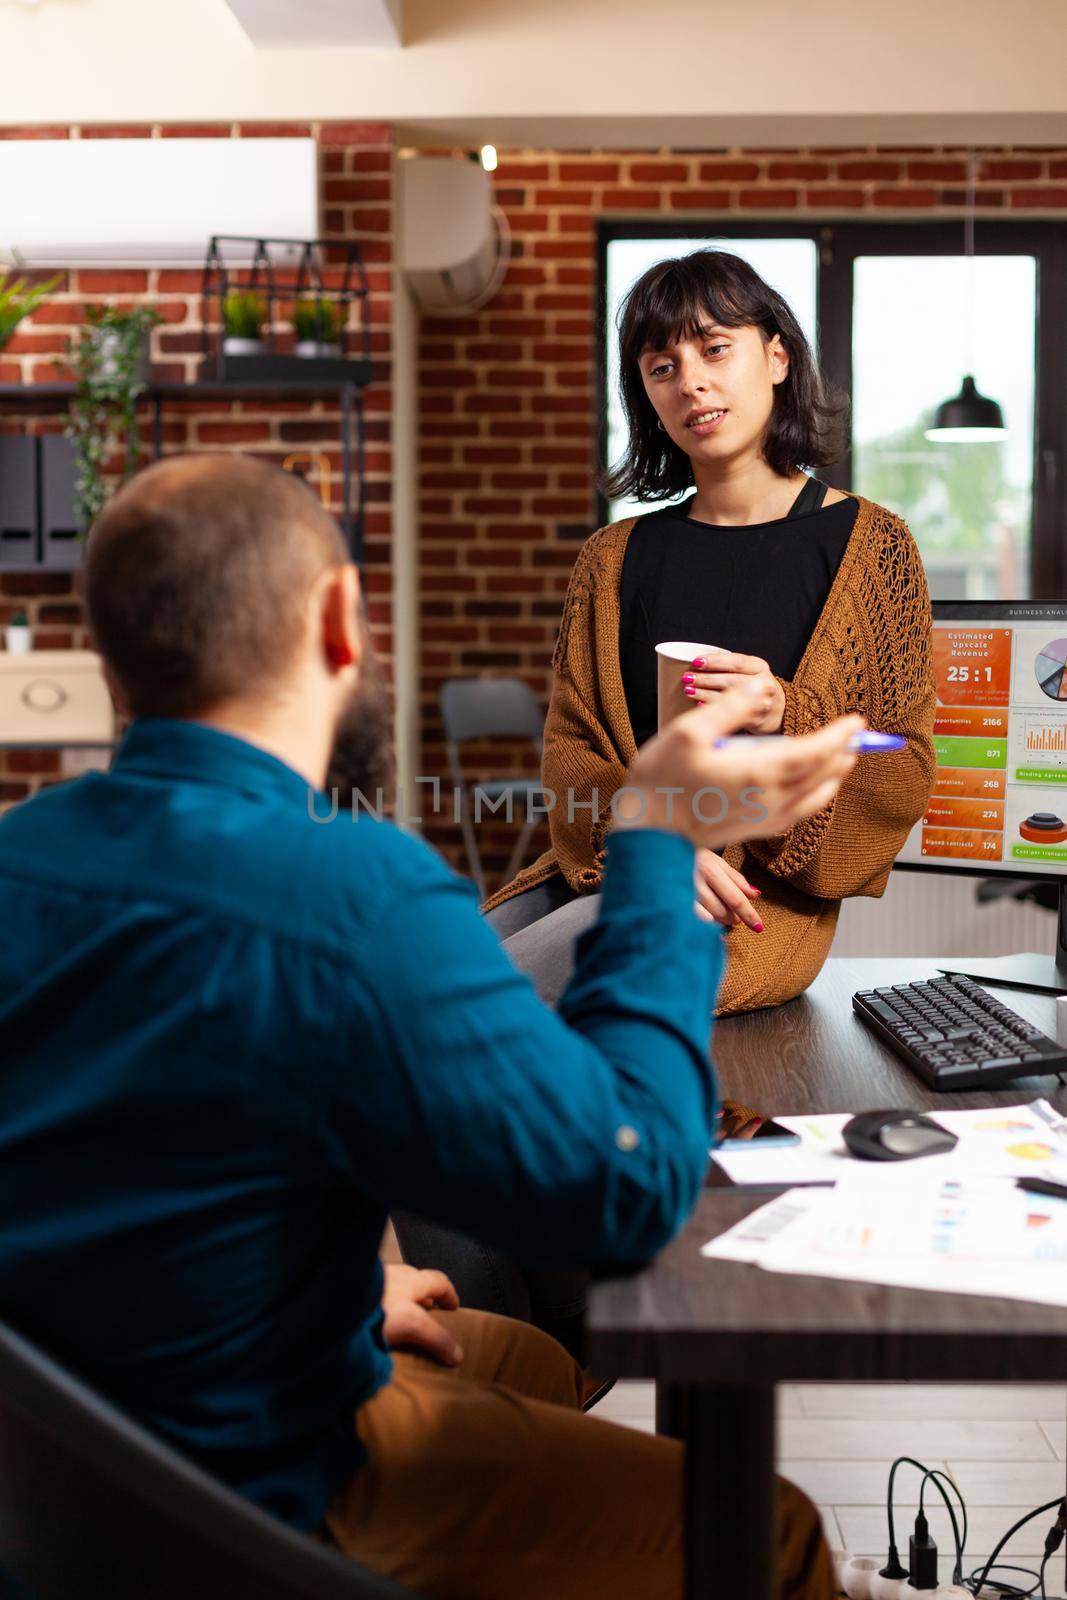 Executive manager talking with entrepreneur woman discussing marketing strategy working at company presentation brainstorming ideas in startup office. Businesspeople planning business meeting